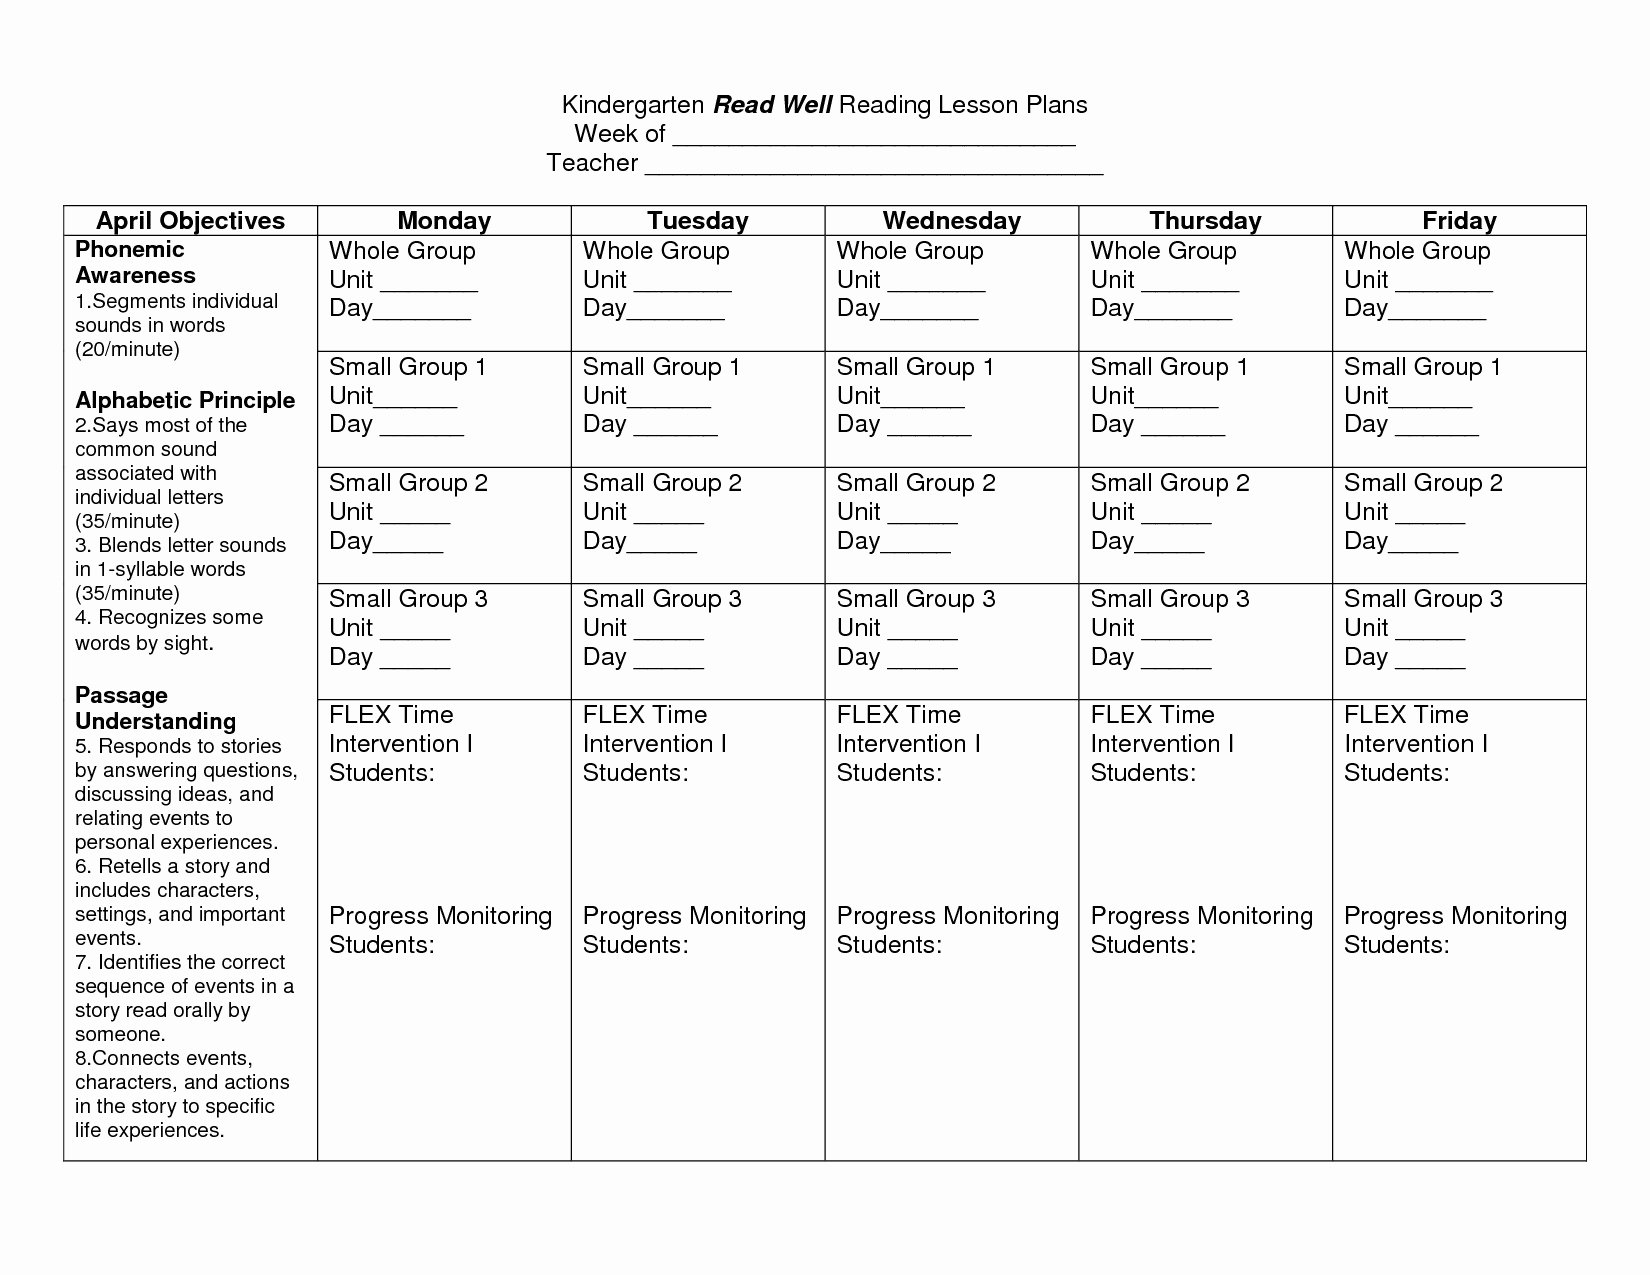 Reading Lesson Plan Template New What is Reading Definition Pdf From is to What is